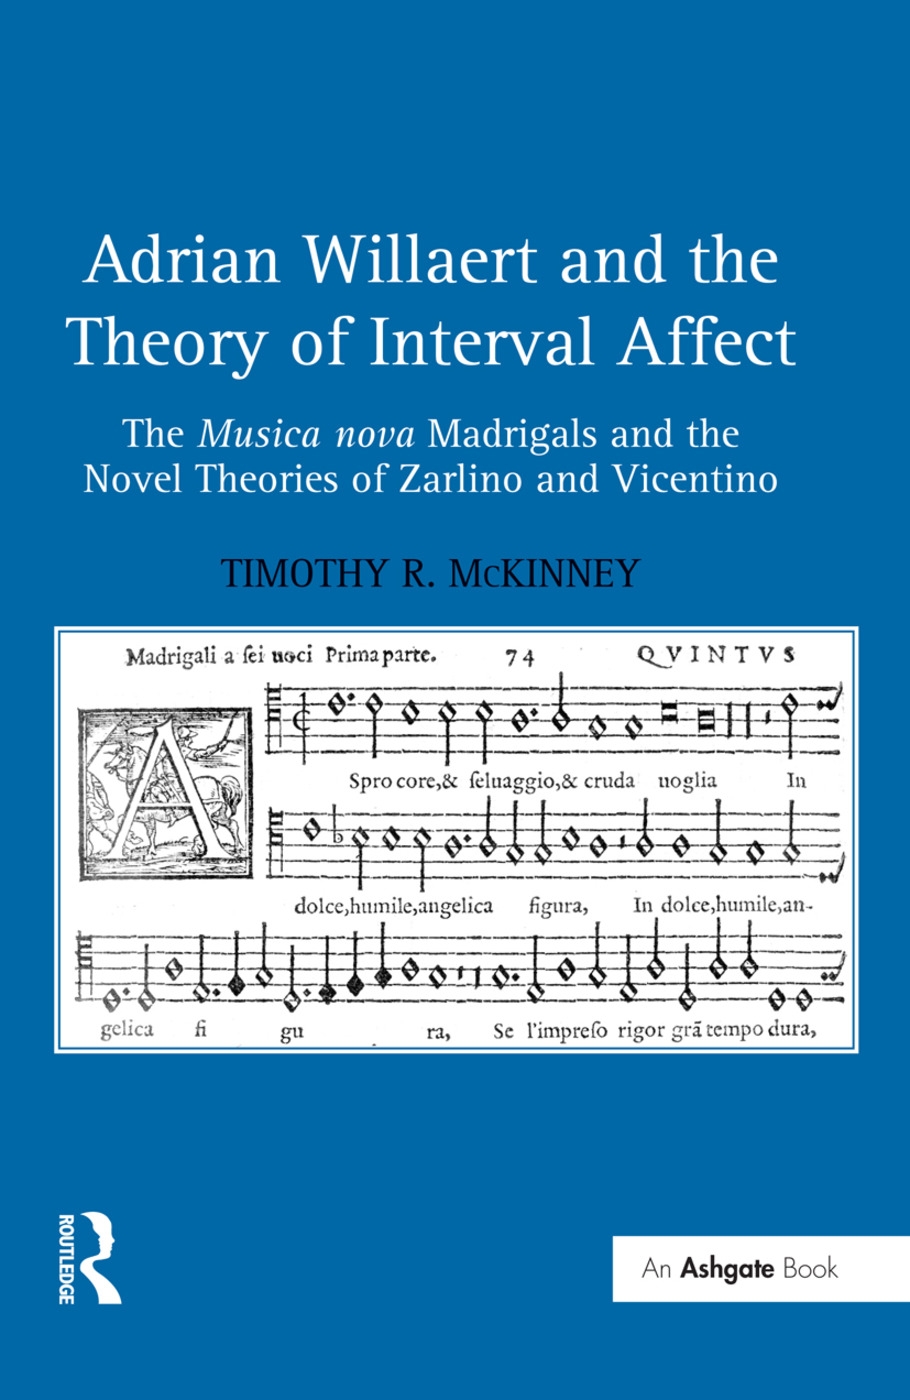 Adrian Willaert and the Theory of Interval Affect: The Musica Nova Madrigals and the Novel Theories of Zarlino and Vicentino. by Timothy R. McKinney